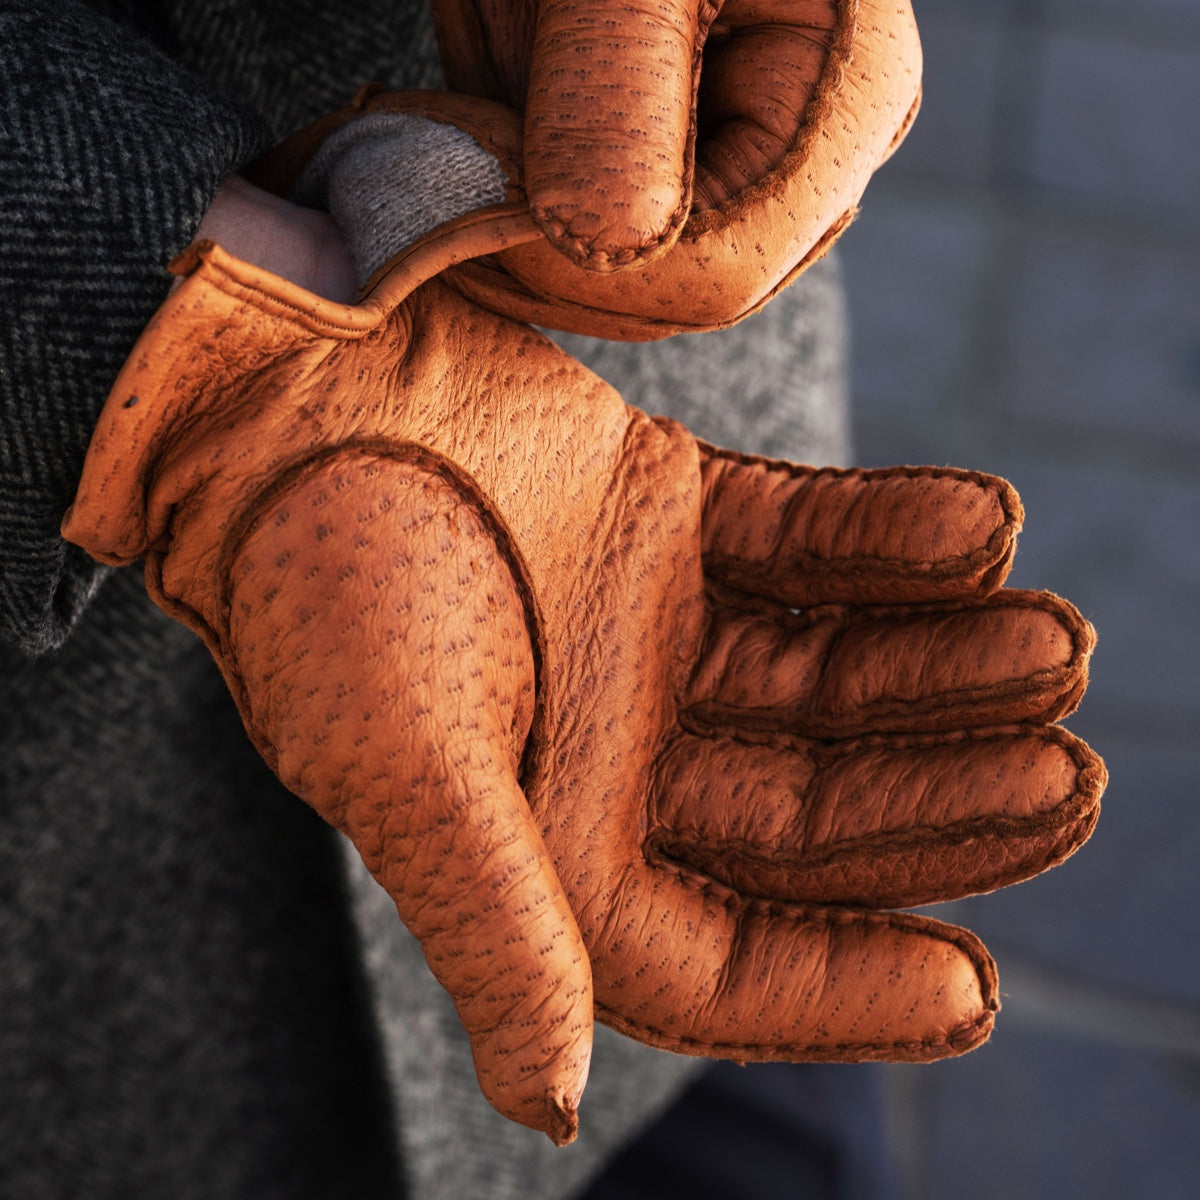 Leather types & linings for our leather gloves